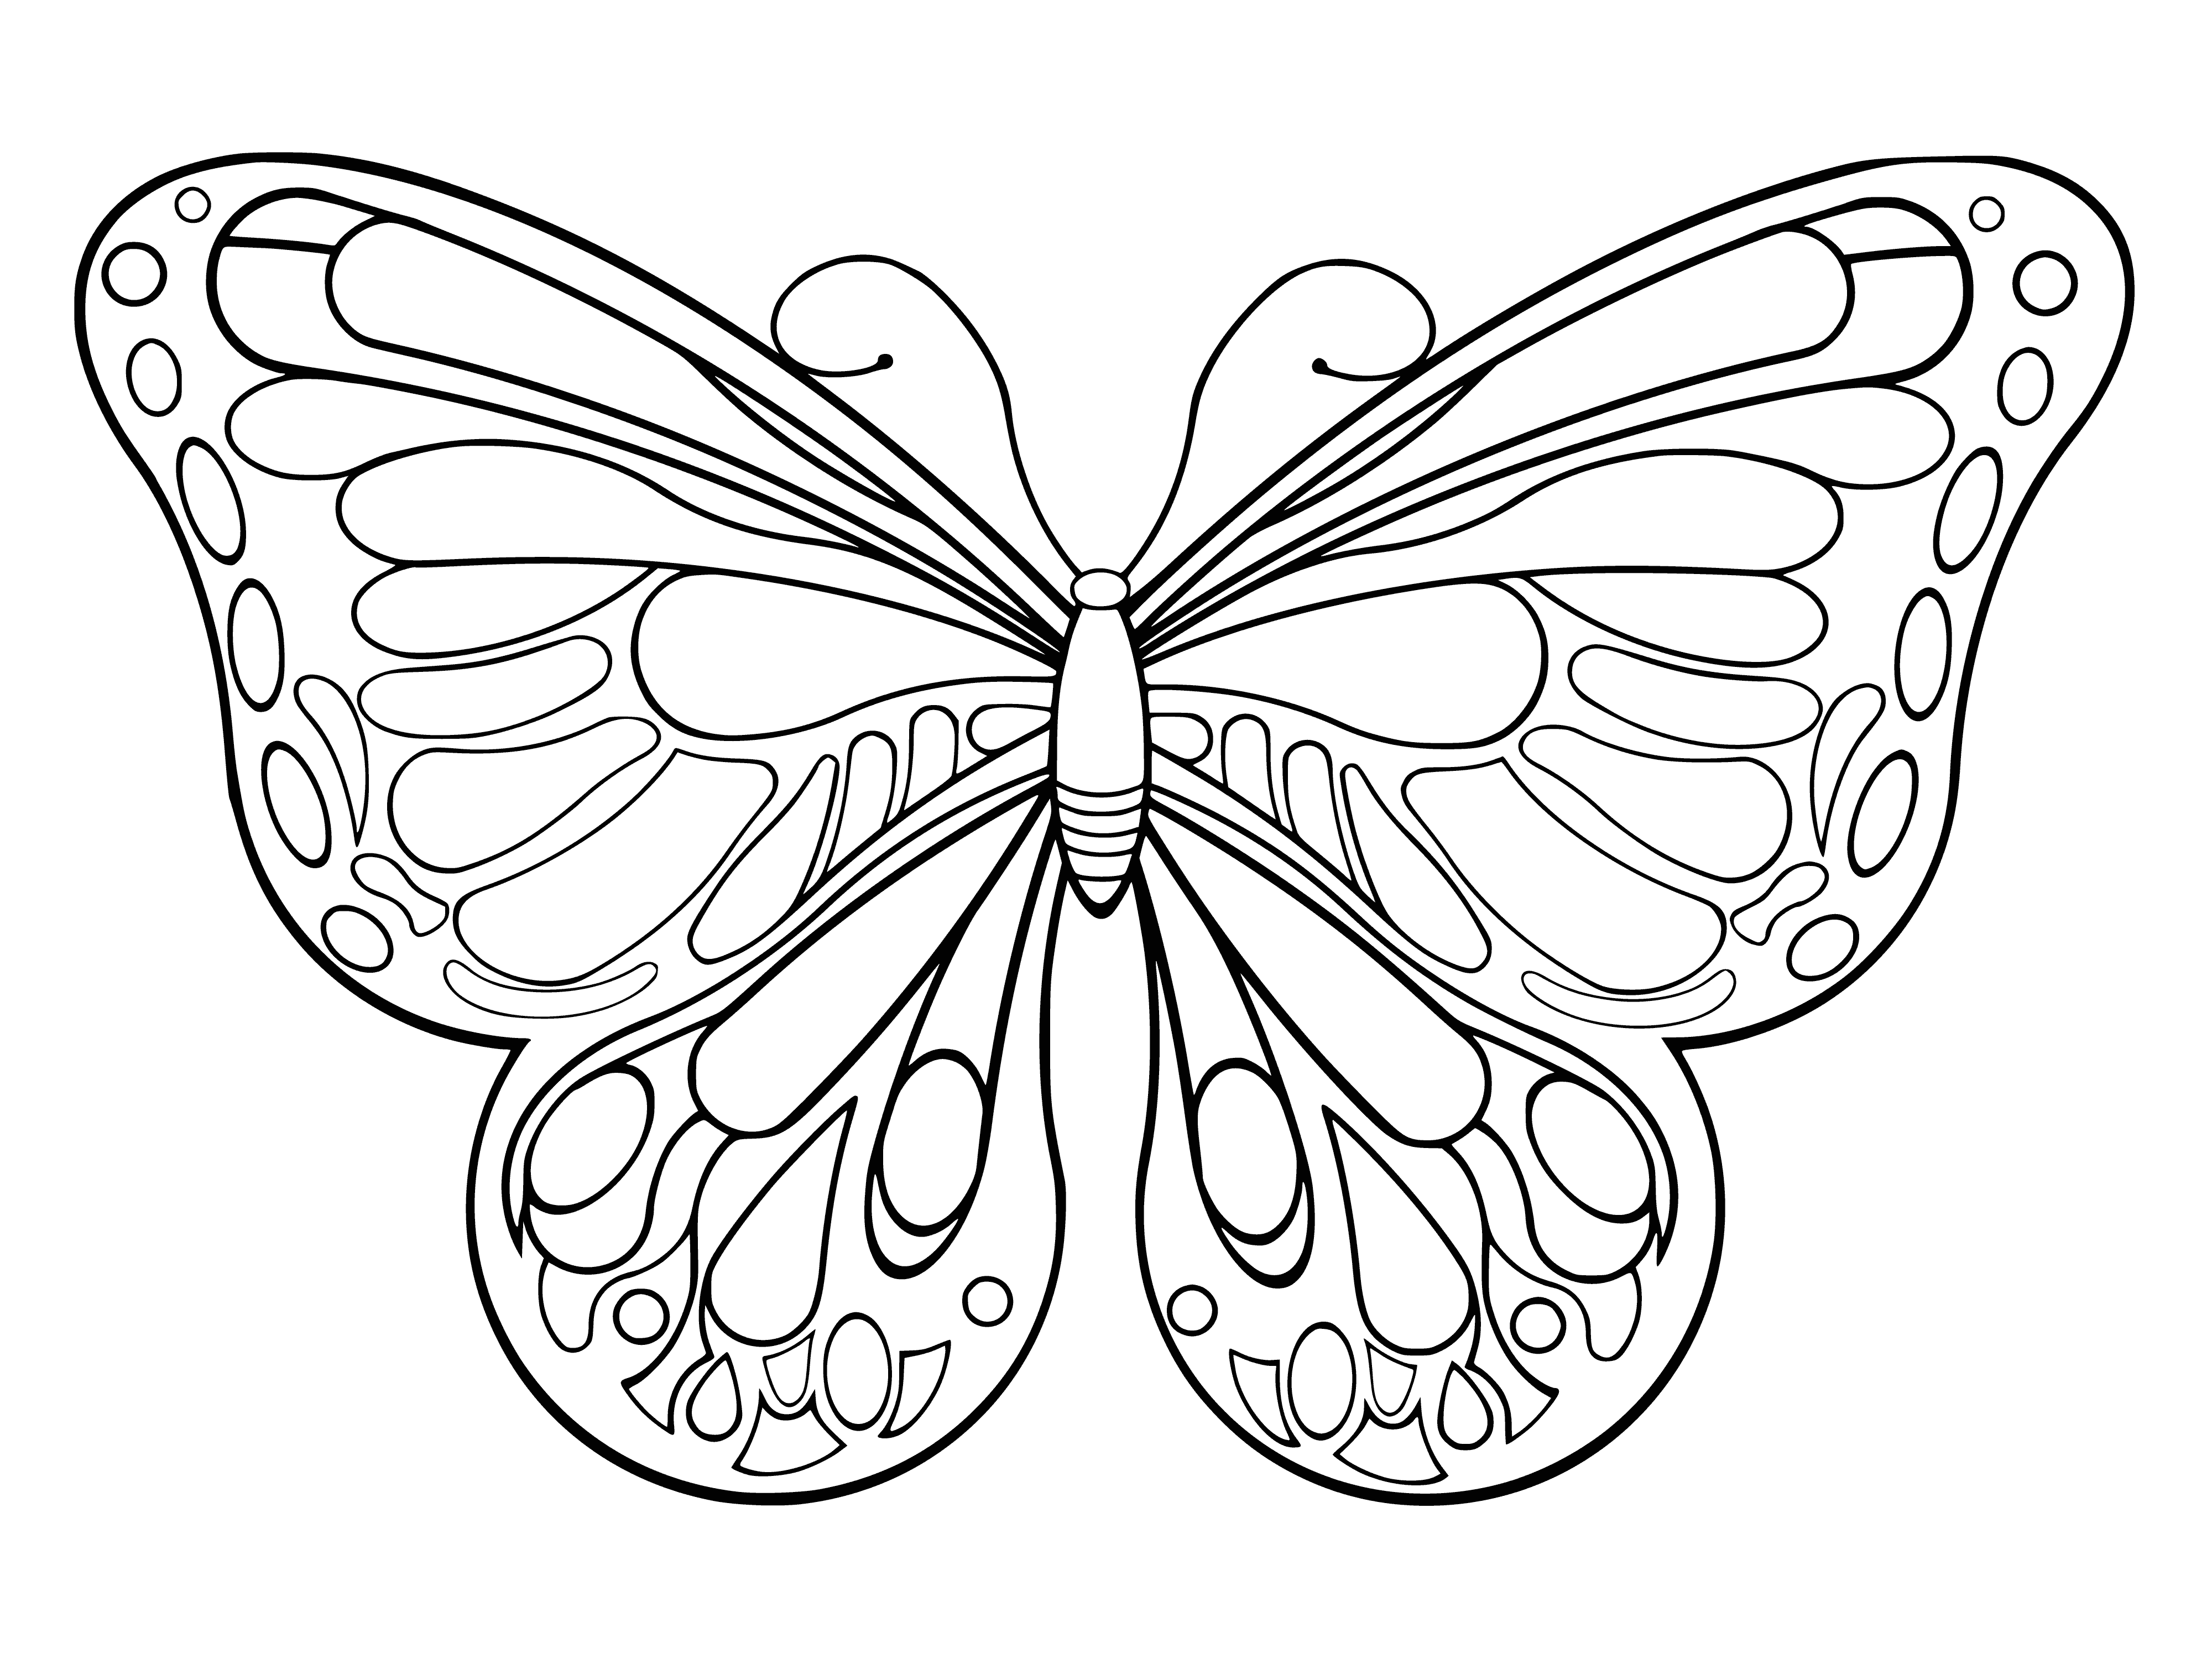 coloring page: Close-up coloring page of light blue butterfly resting on flower, with black and white markings on wings. #coloring #butterfly